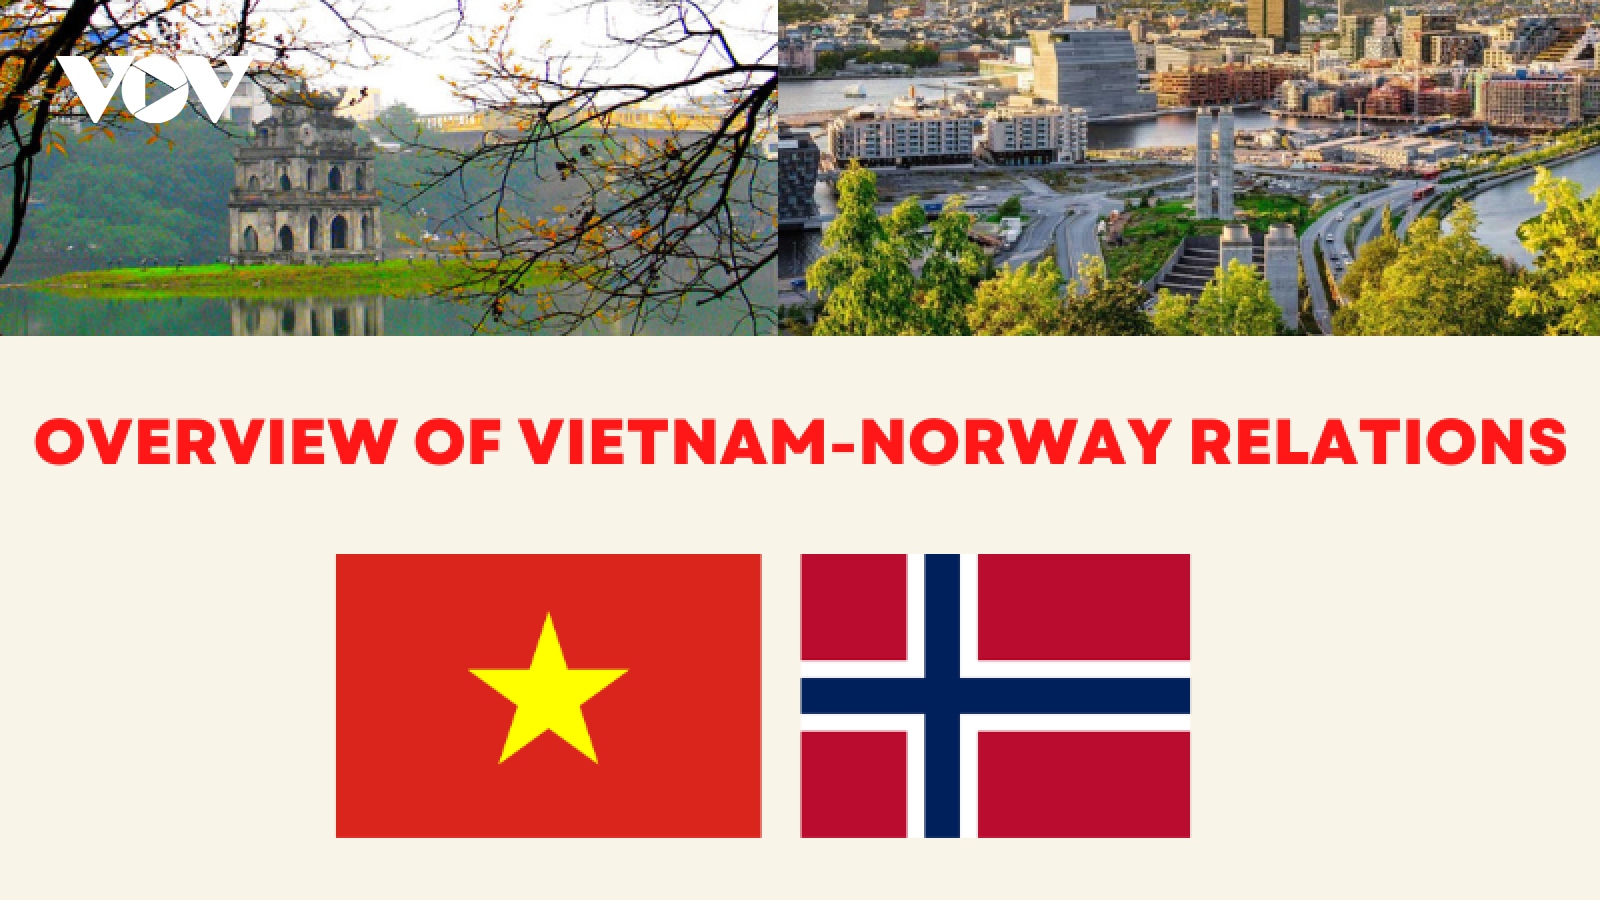 Over half-a-century of Vietnam-Norway relations at a glance